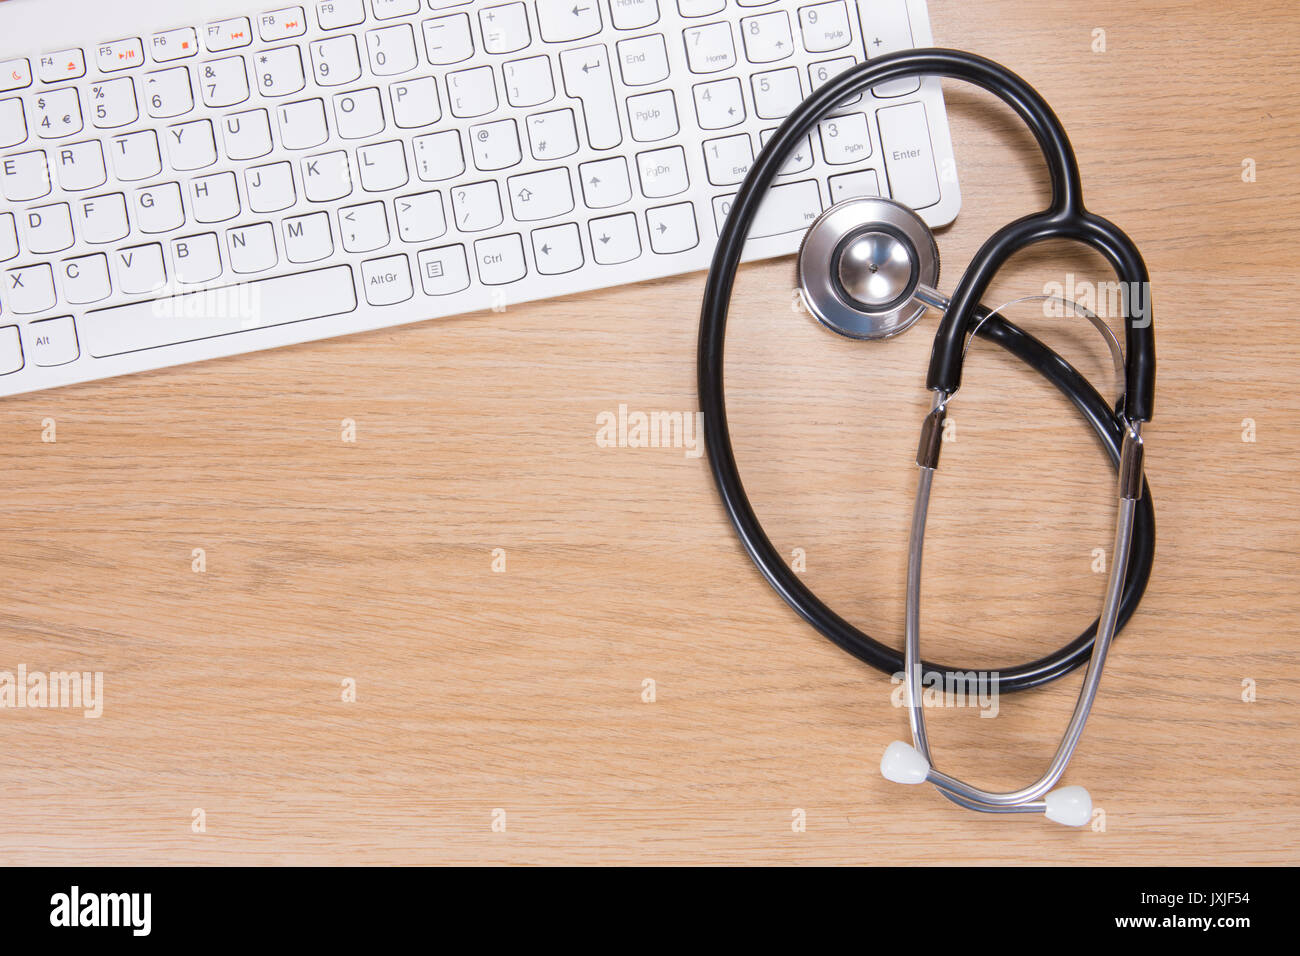 High angle view of acoustic stethoscope with computer keyboard lying against wooden background Stock Photo